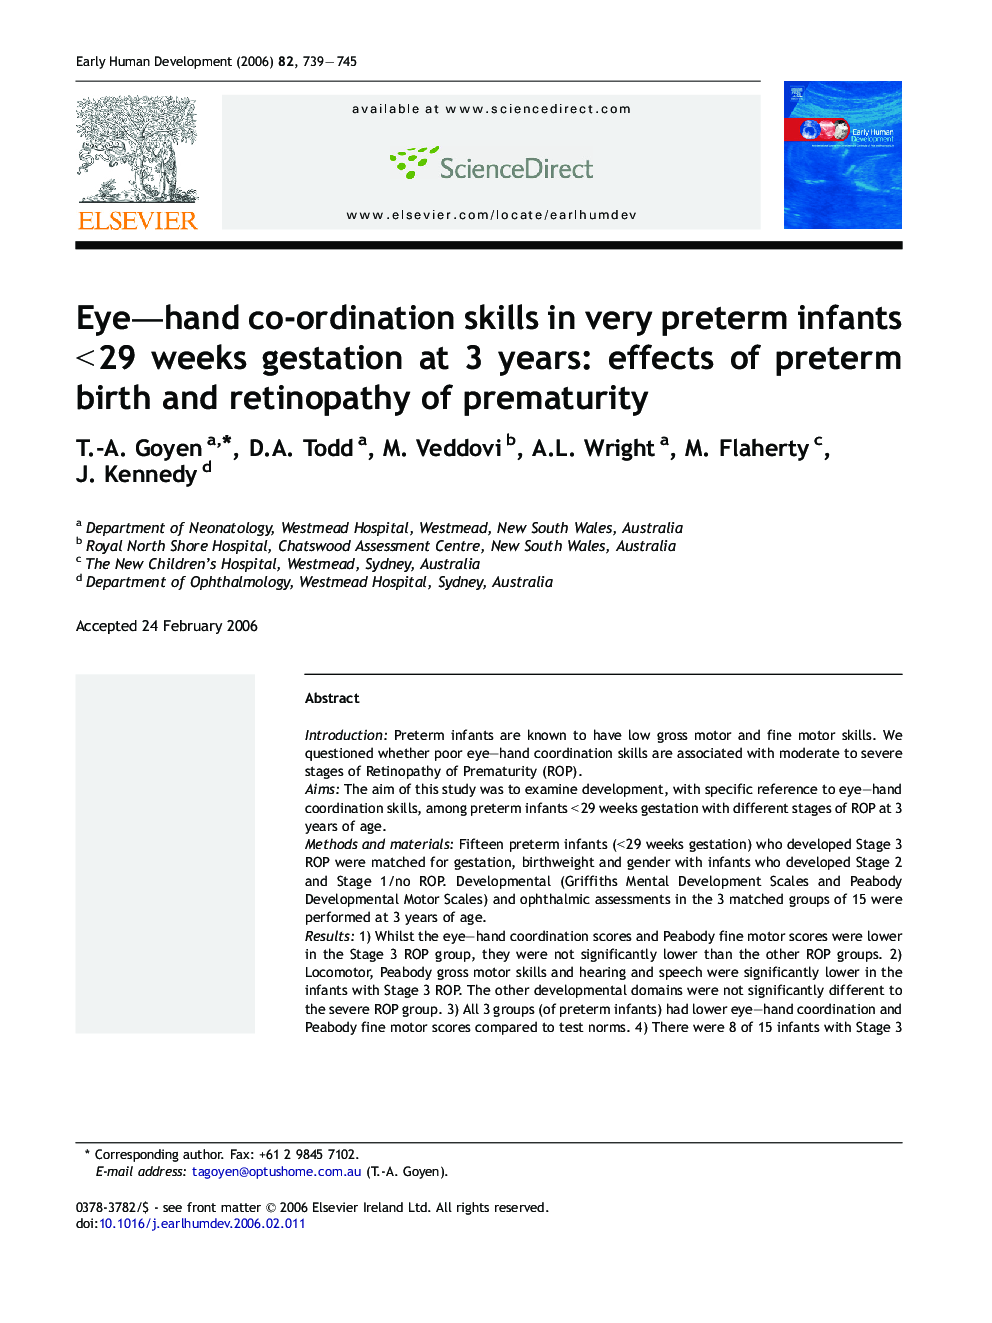 Eye–hand co-ordination skills in very preterm infants < 29 weeks gestation at 3 years: effects of preterm birth and retinopathy of prematurity